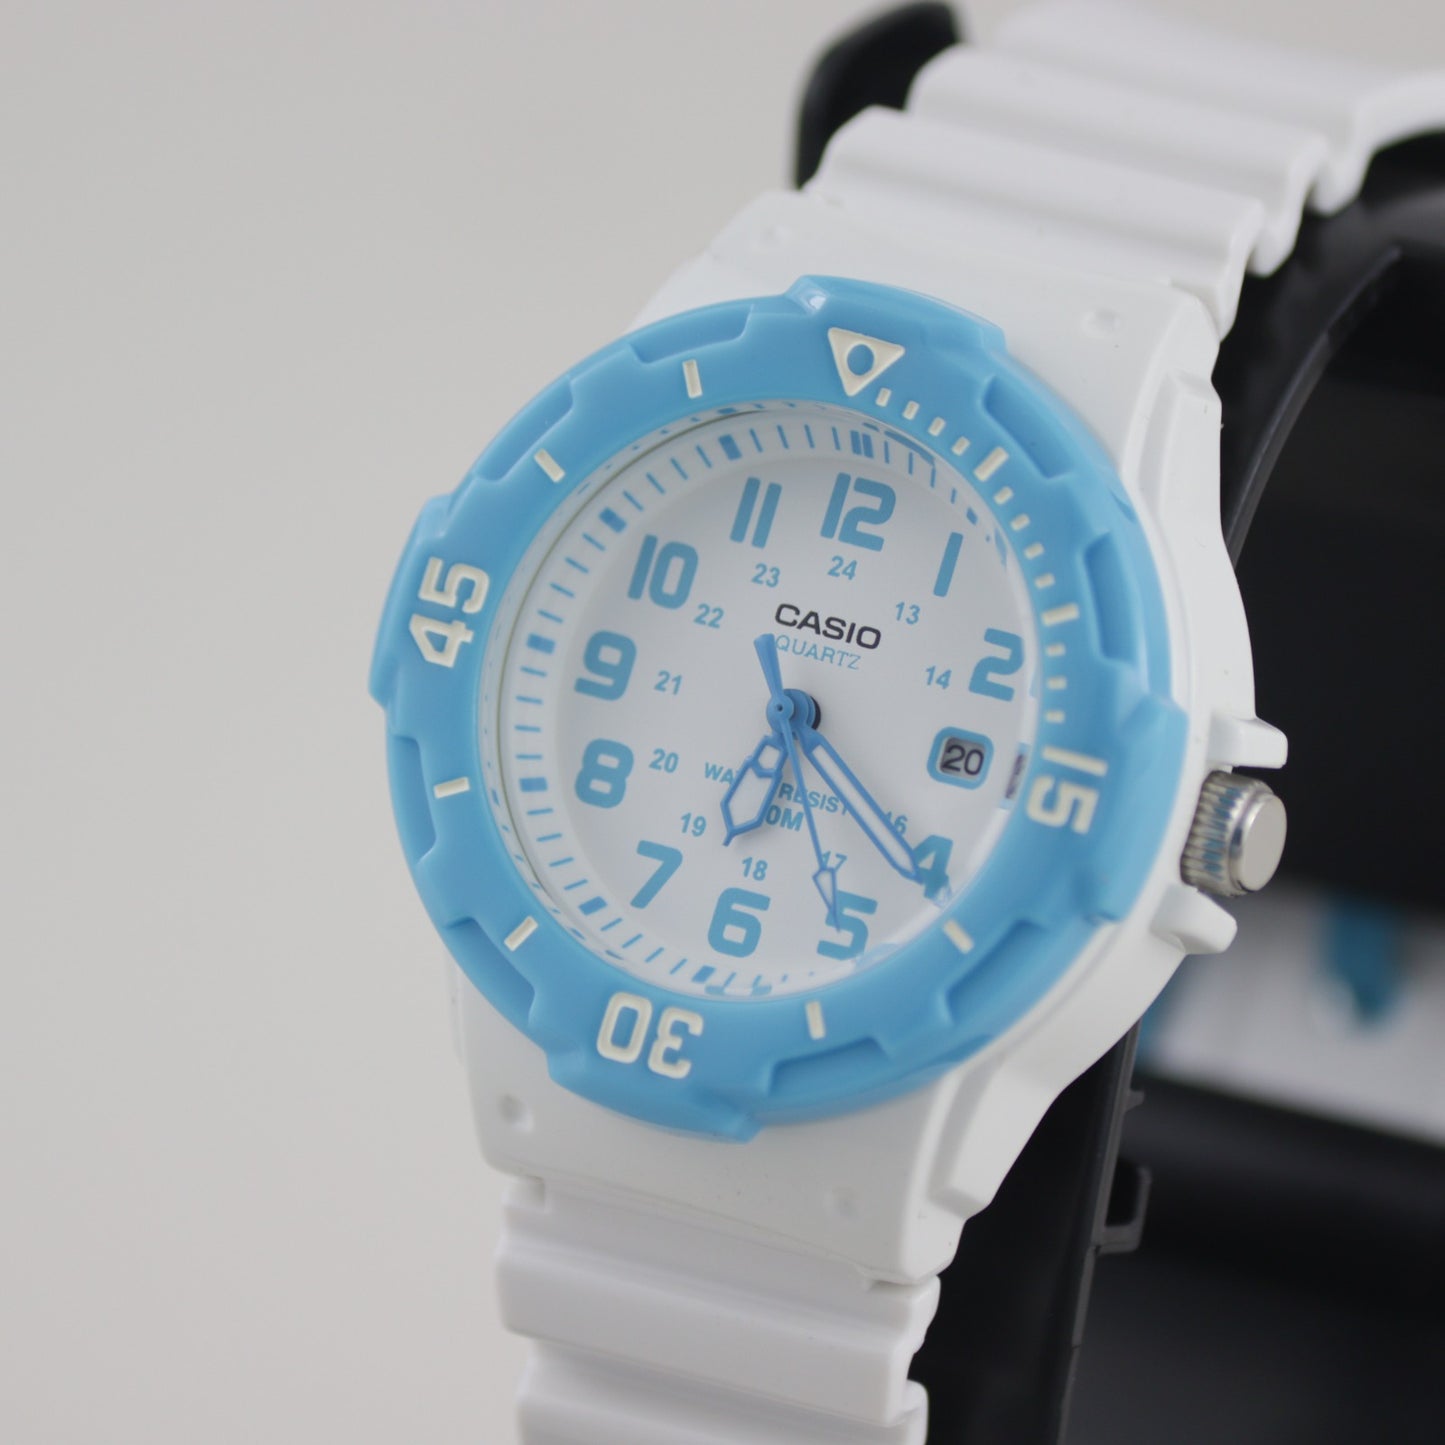 Casio Women's Dive Style Watch, White/Blue Accents